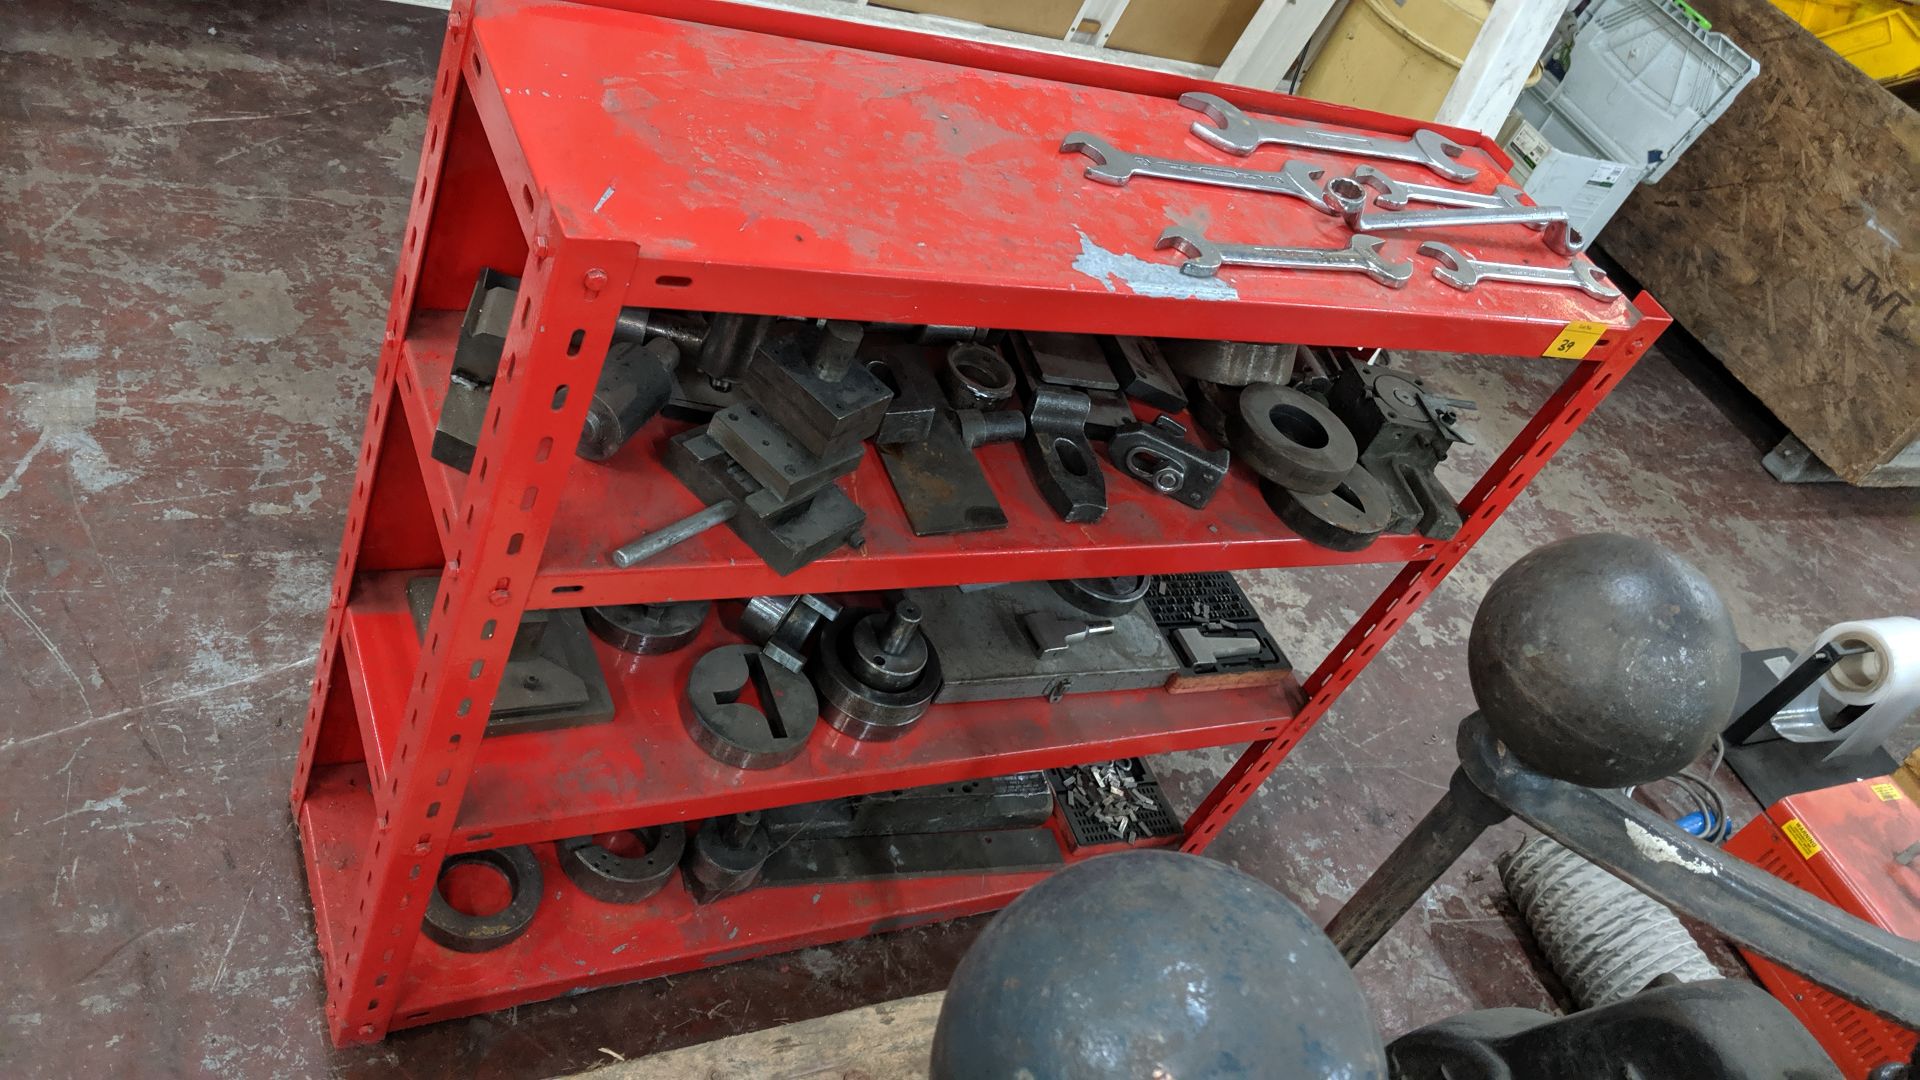 Quantity of tooling for use with fly presses, including the red shelving unit upon which the tooling